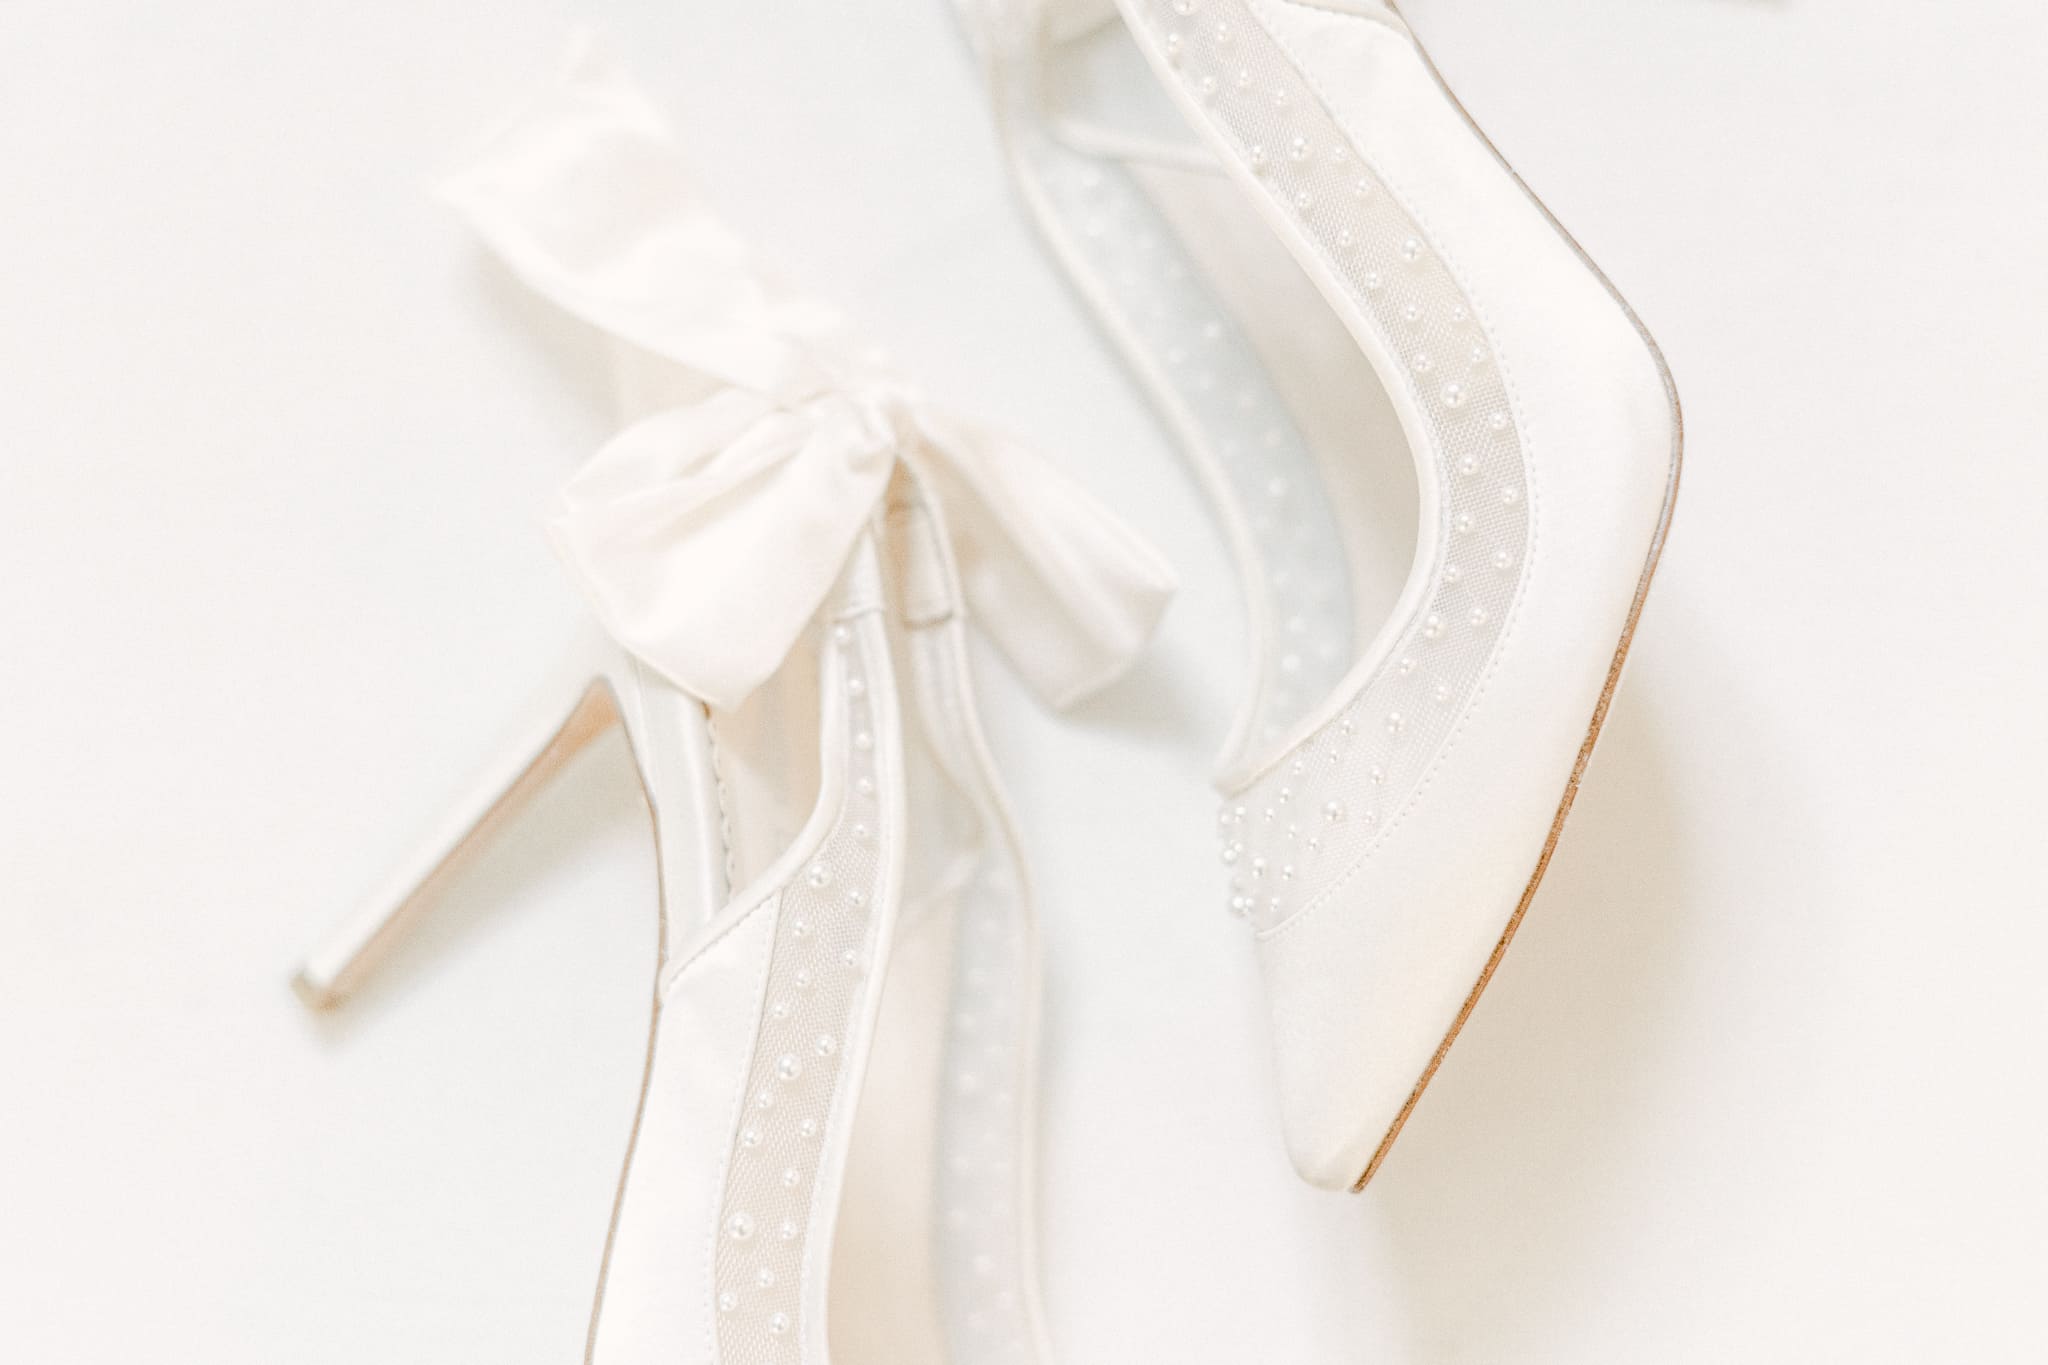 Bella Belle wedding shoes with pearls and bows in white